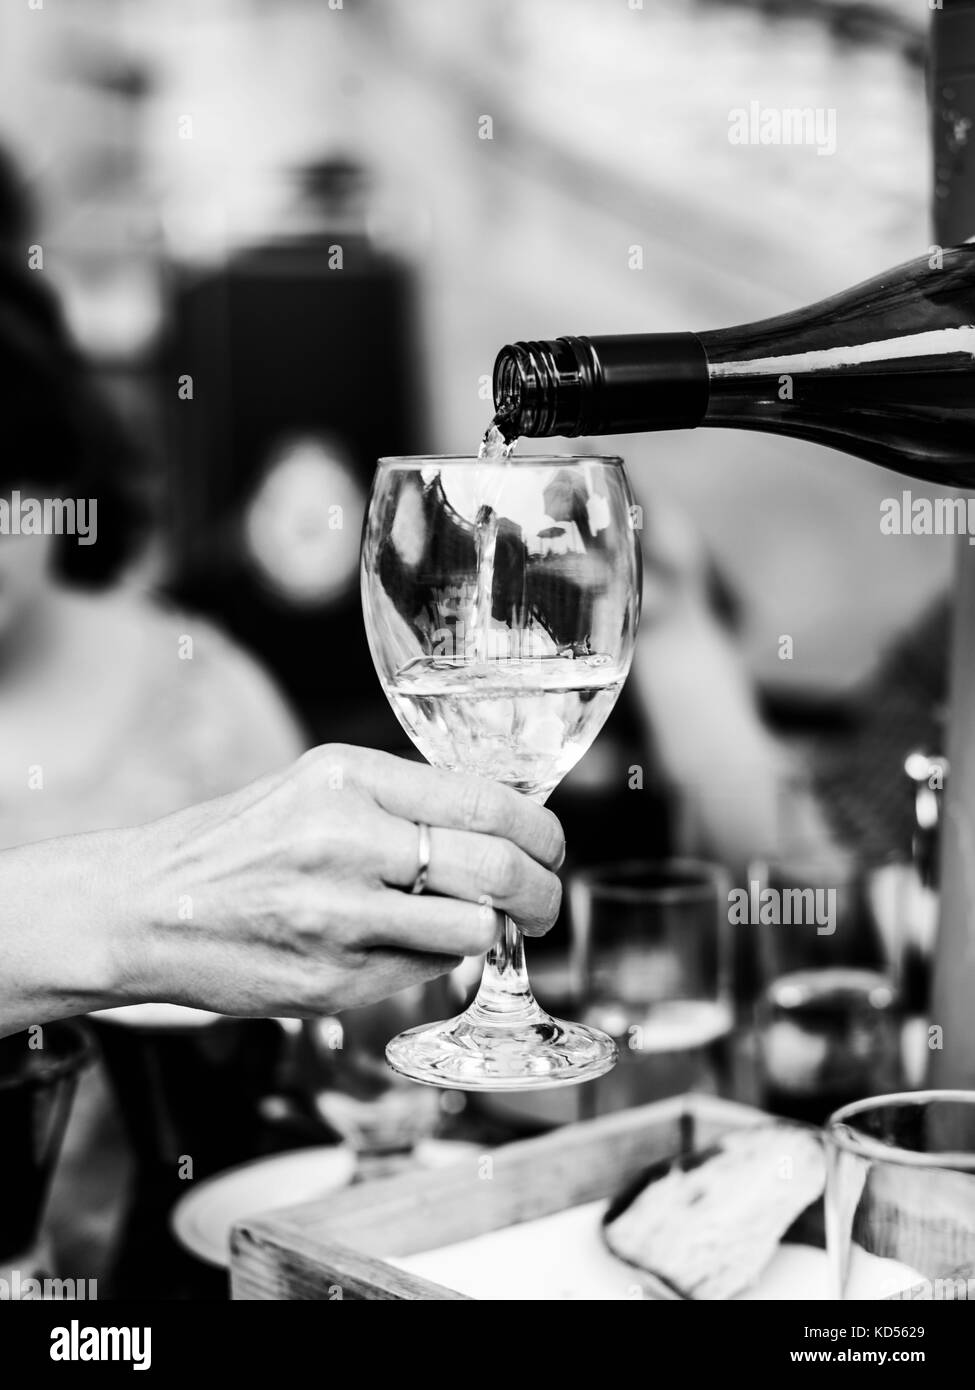 Black and White Monochrome Image of Pouring White Wine Into a Wine Glass From a Bottle In an Outside or Ourdoor Setting Stock Photo